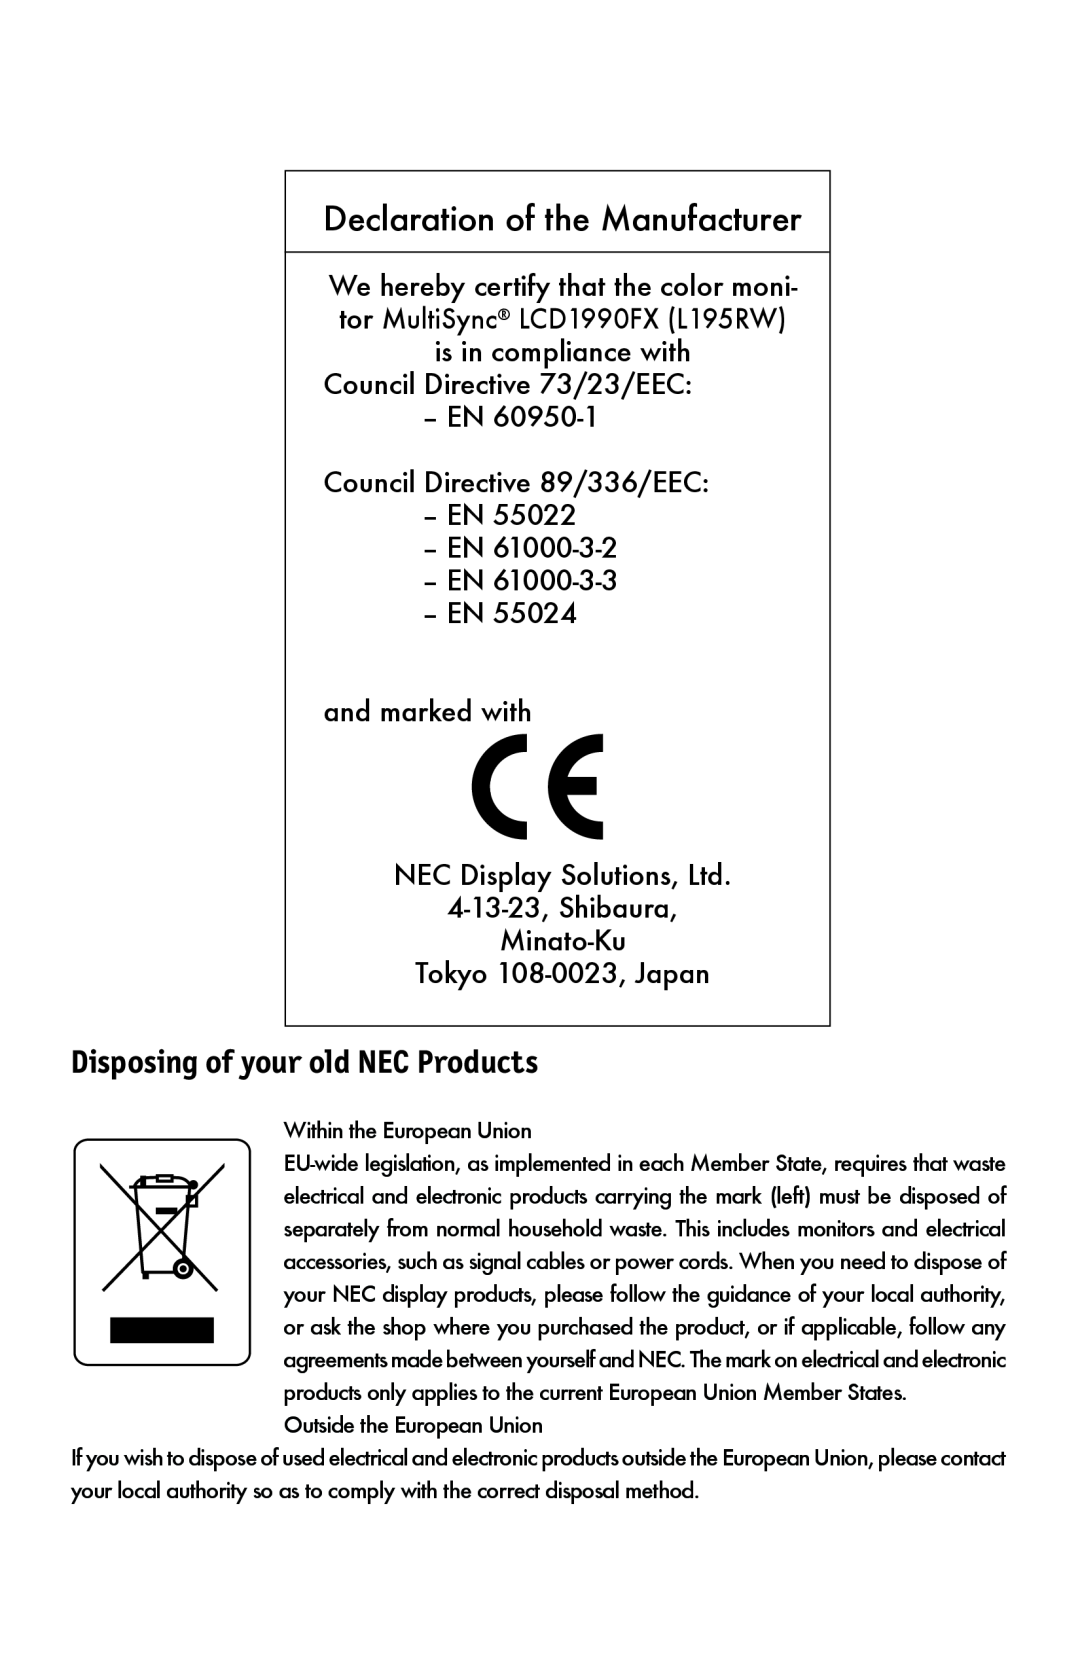 NEC LCD1990FXTM user manual Declaration of the Manufacturer, Disposing of your old NEC Products 